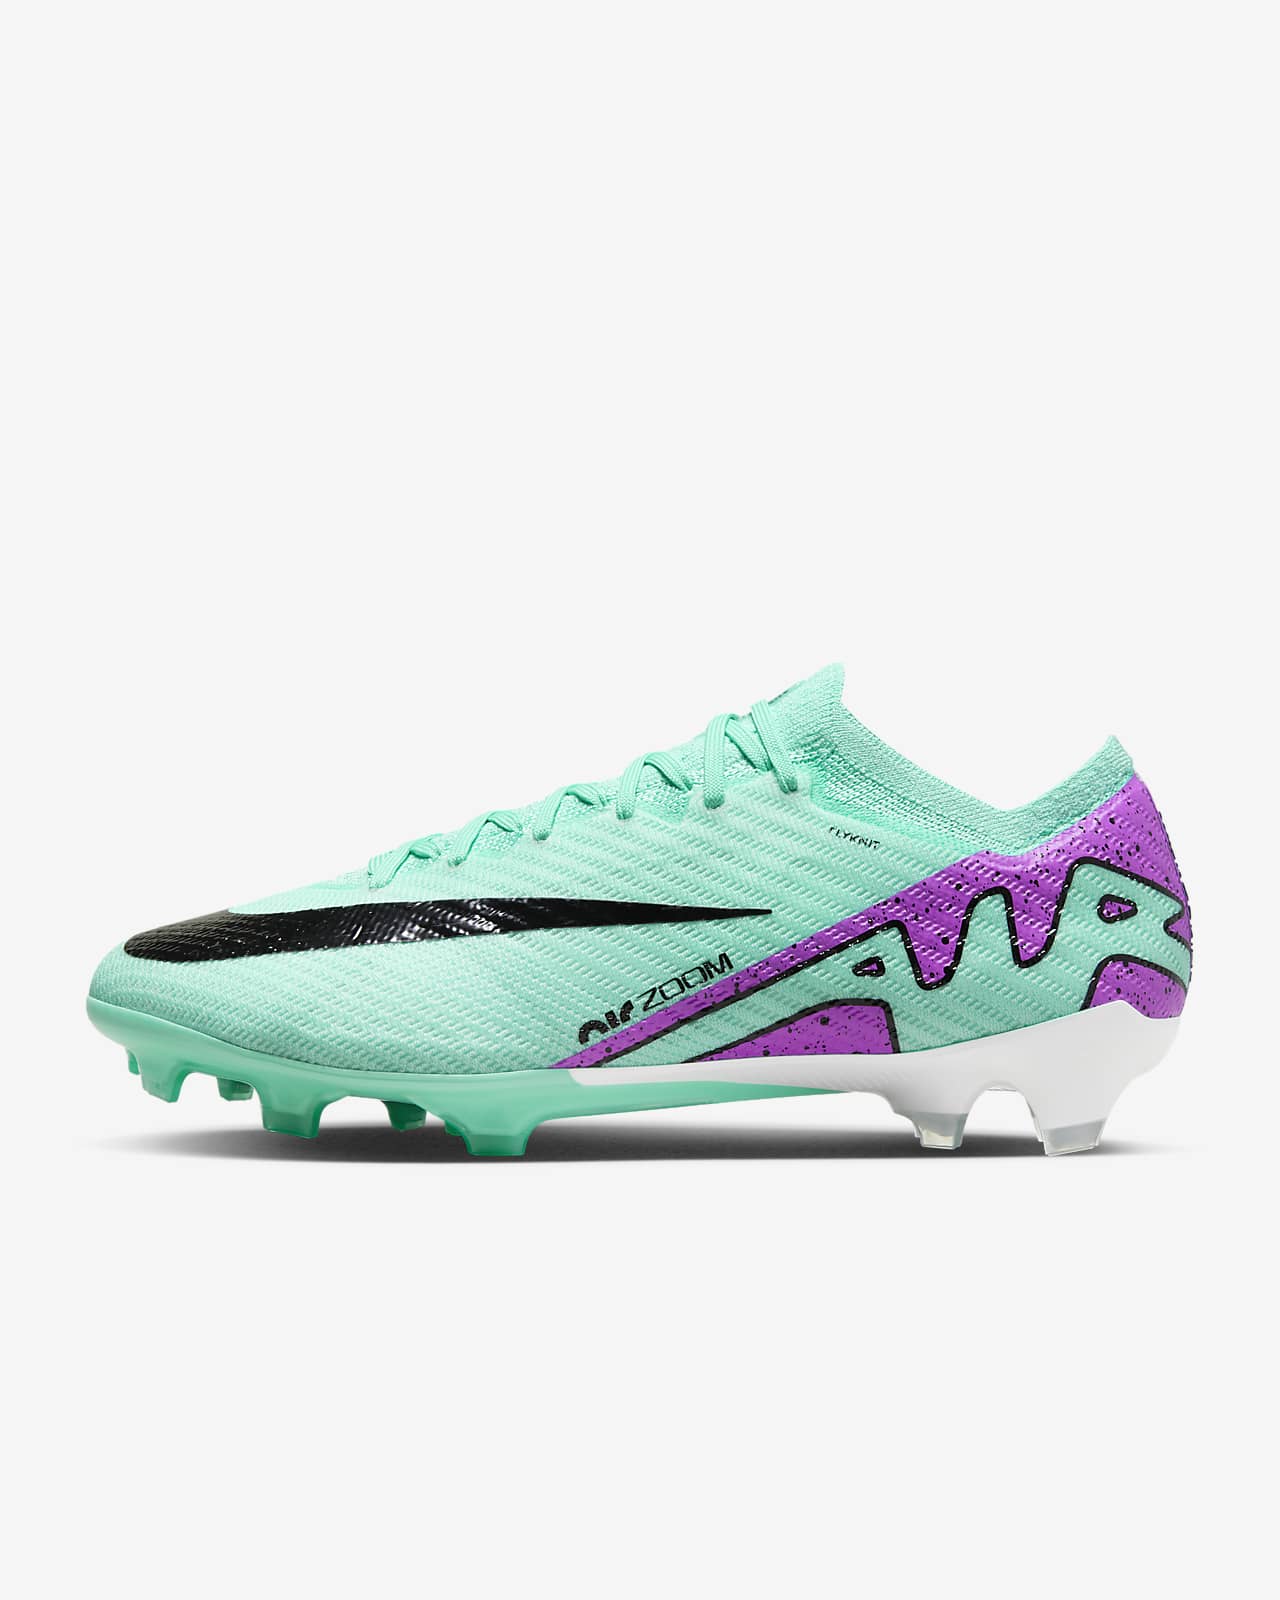 Les meilleures chaussures à crampons Nike Football. Nike LU